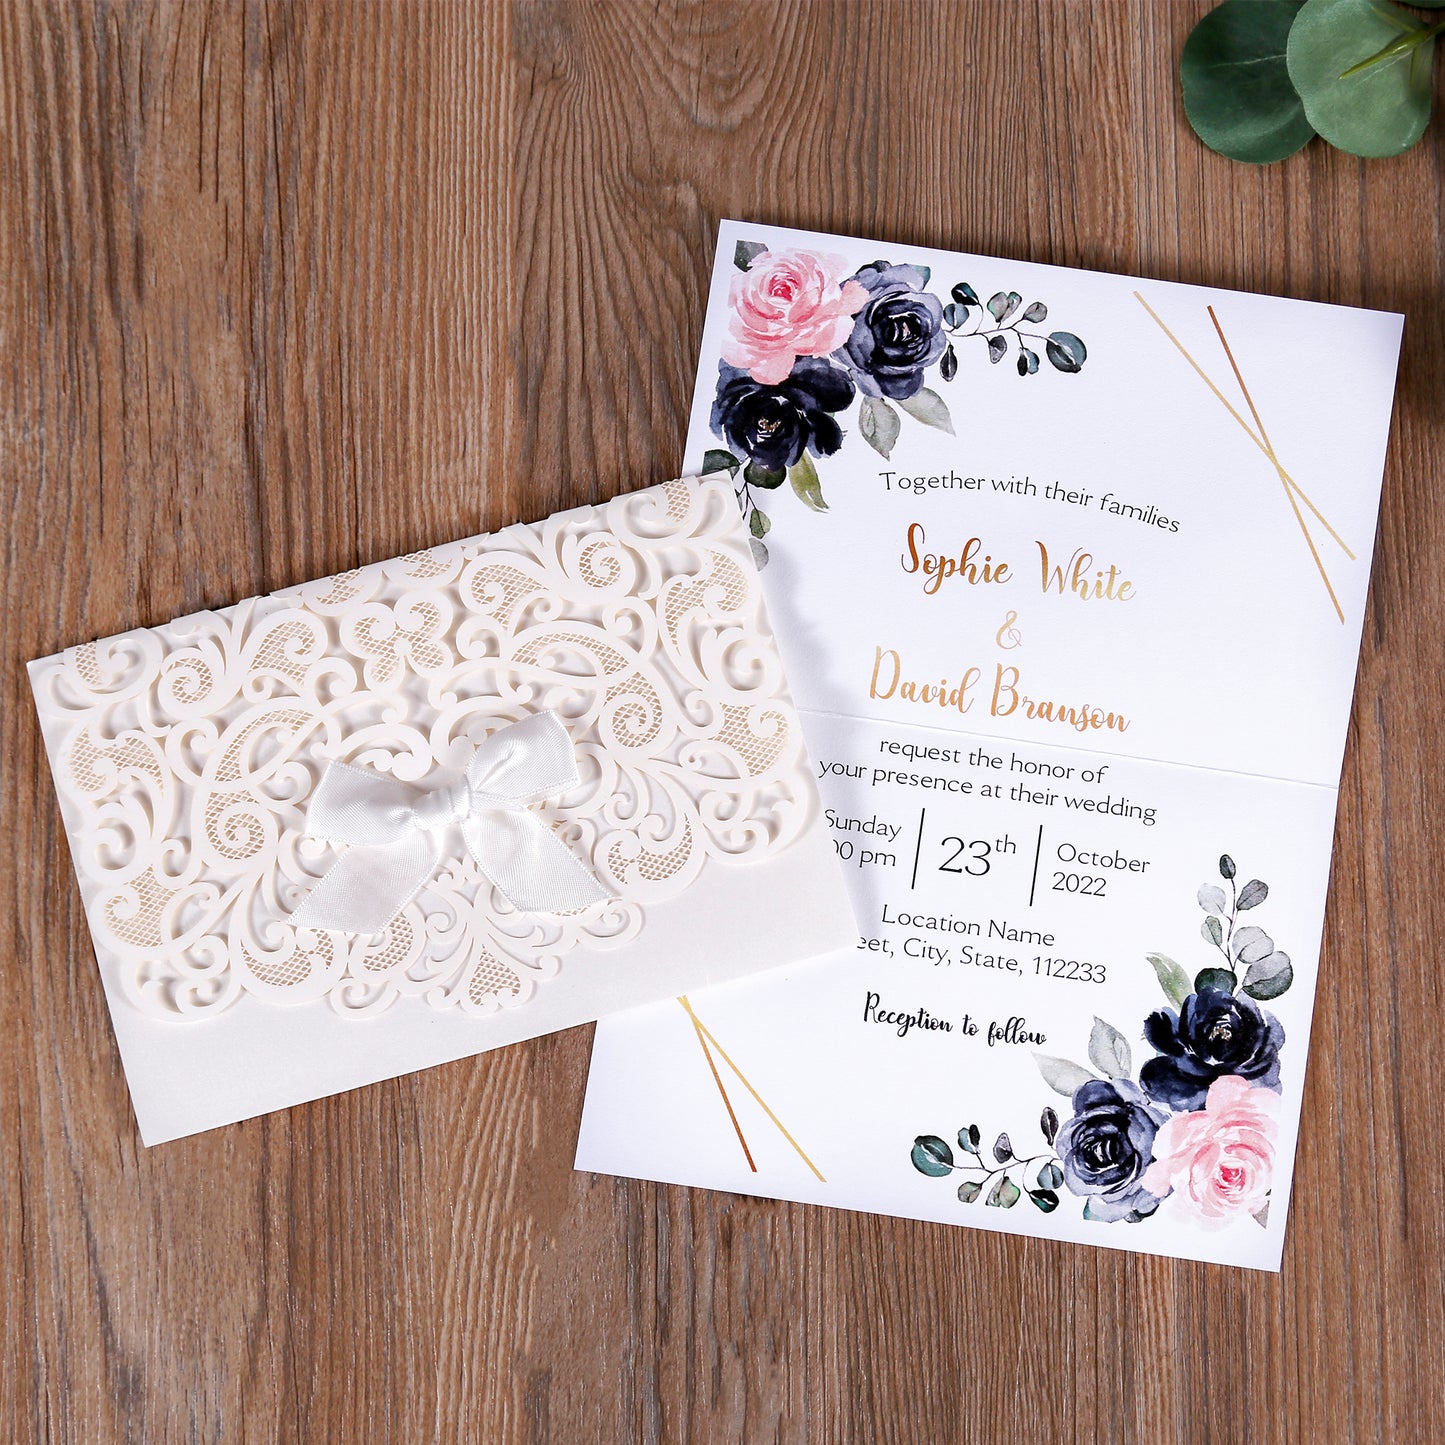 Ivory White Laser Cut Flower with Bowknot Wedding Invitations,Invitations